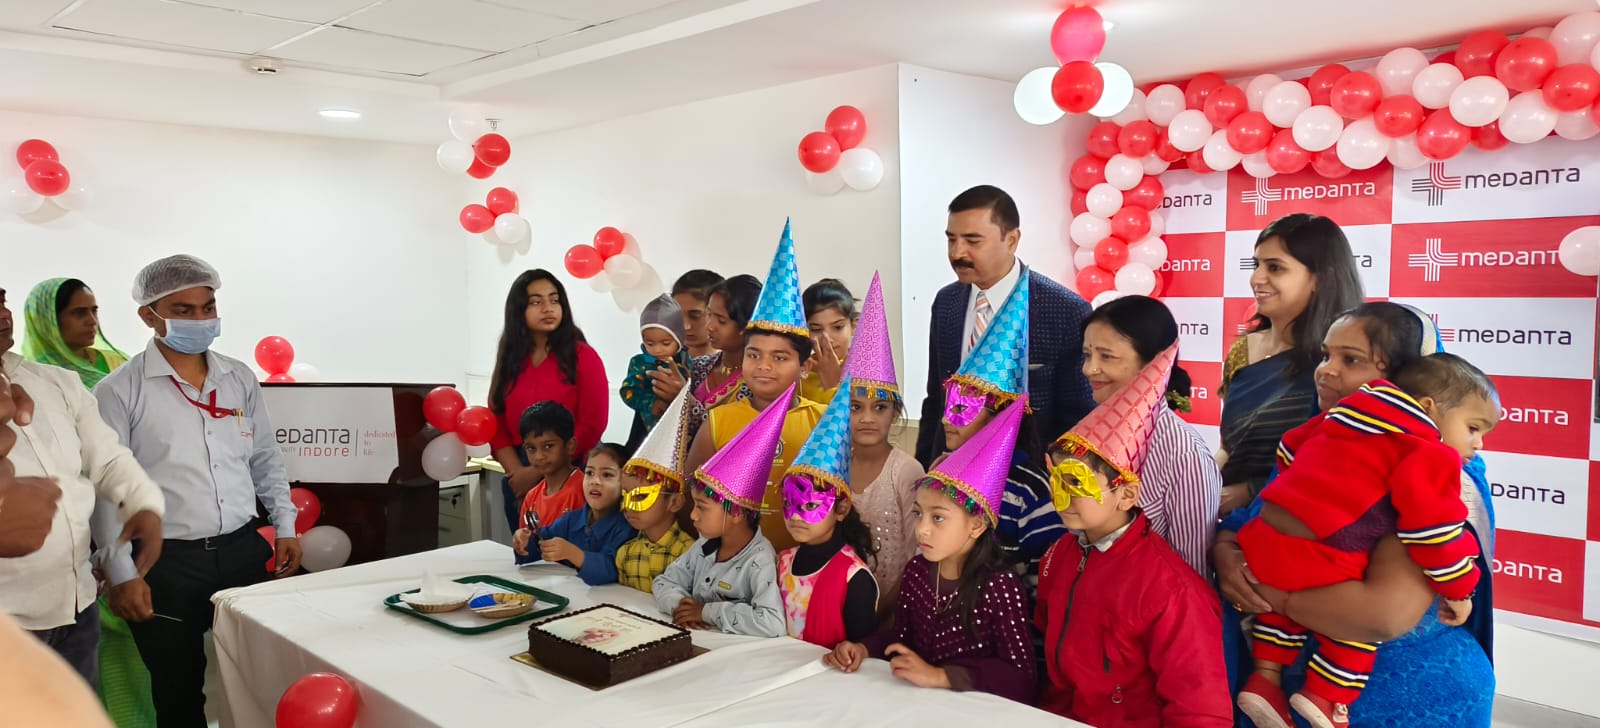 medanta-hospital-indore-gifts-healthy-lives-to-children-afflicted-with-congenital-heart-disease